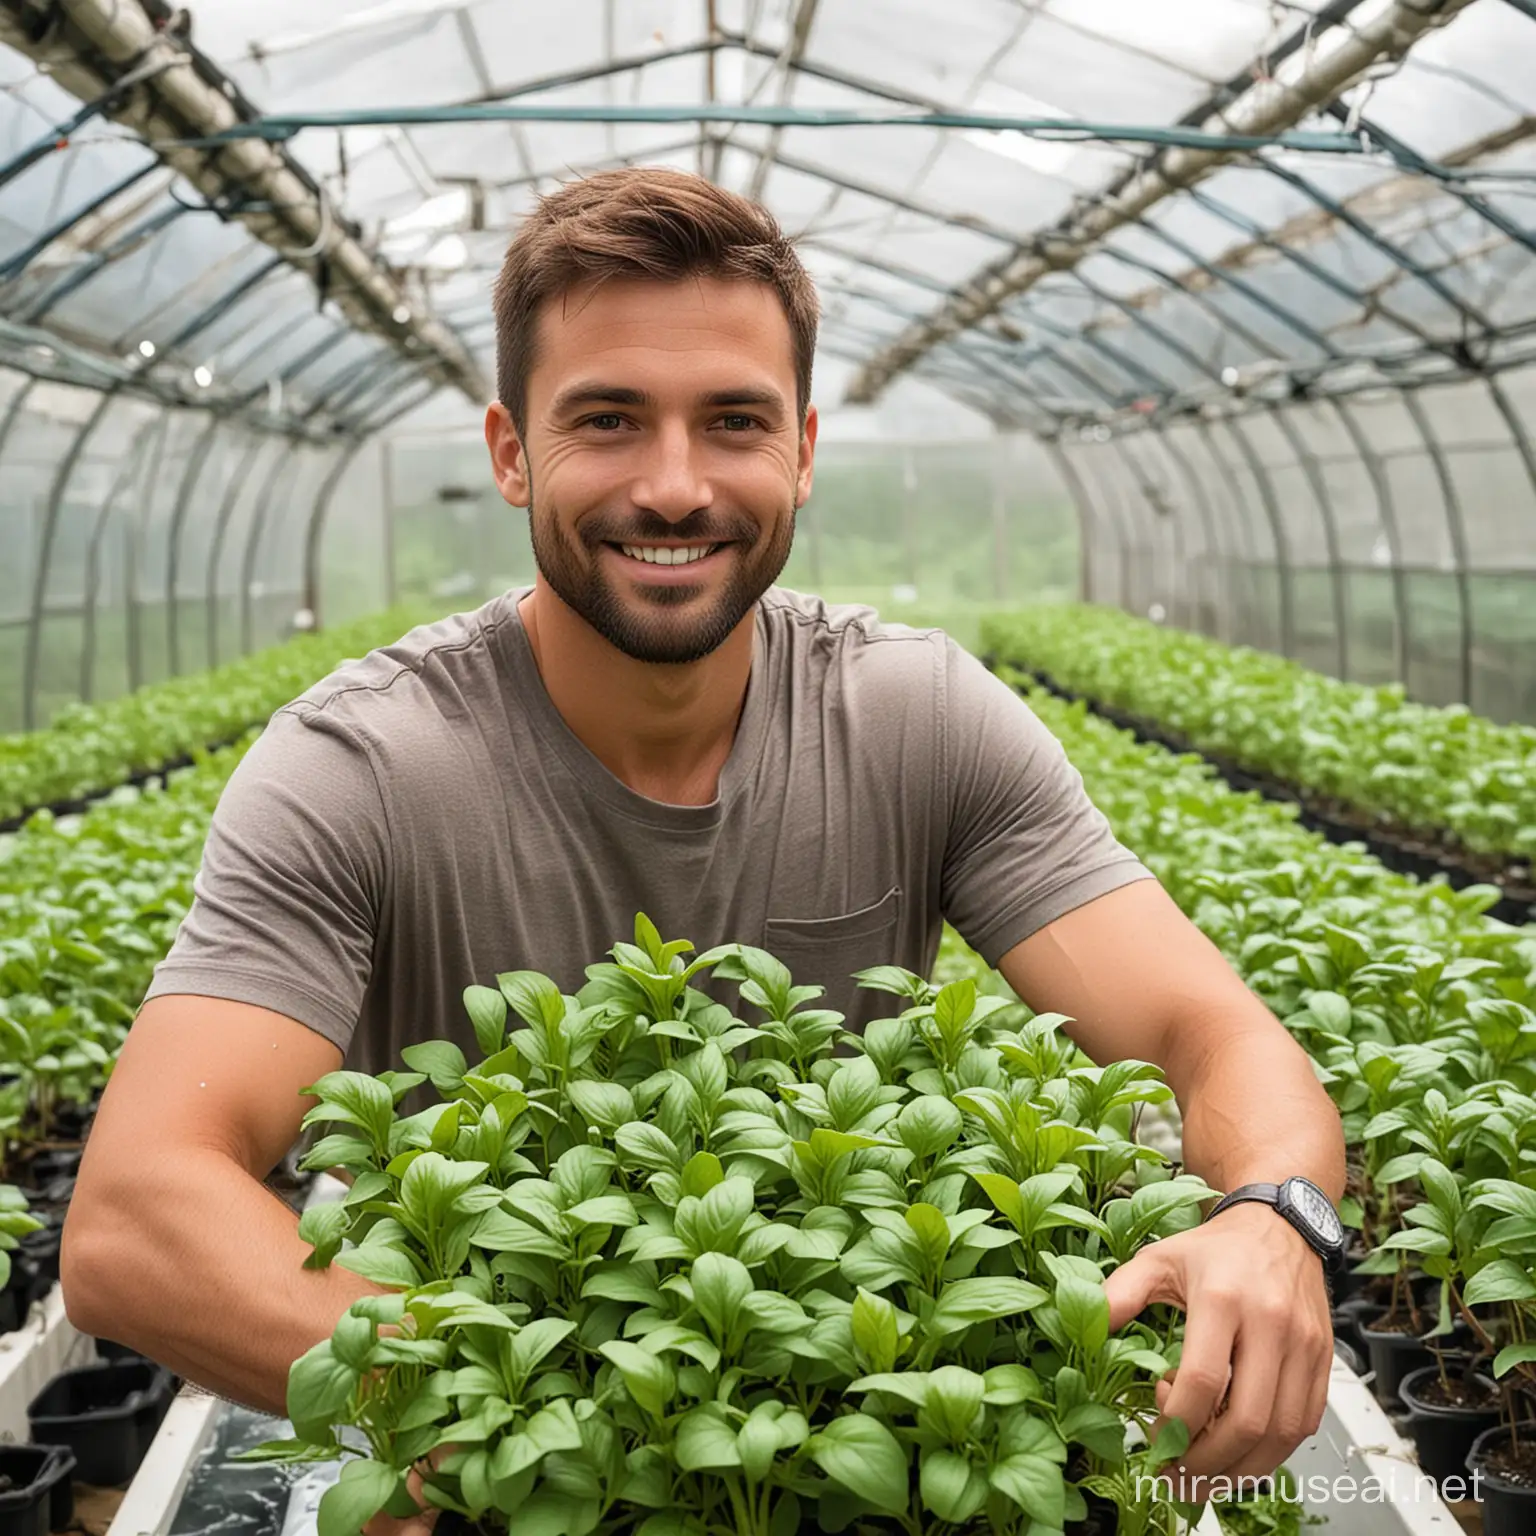 a handsome man with aquaponic setup behind him and holding basil plants